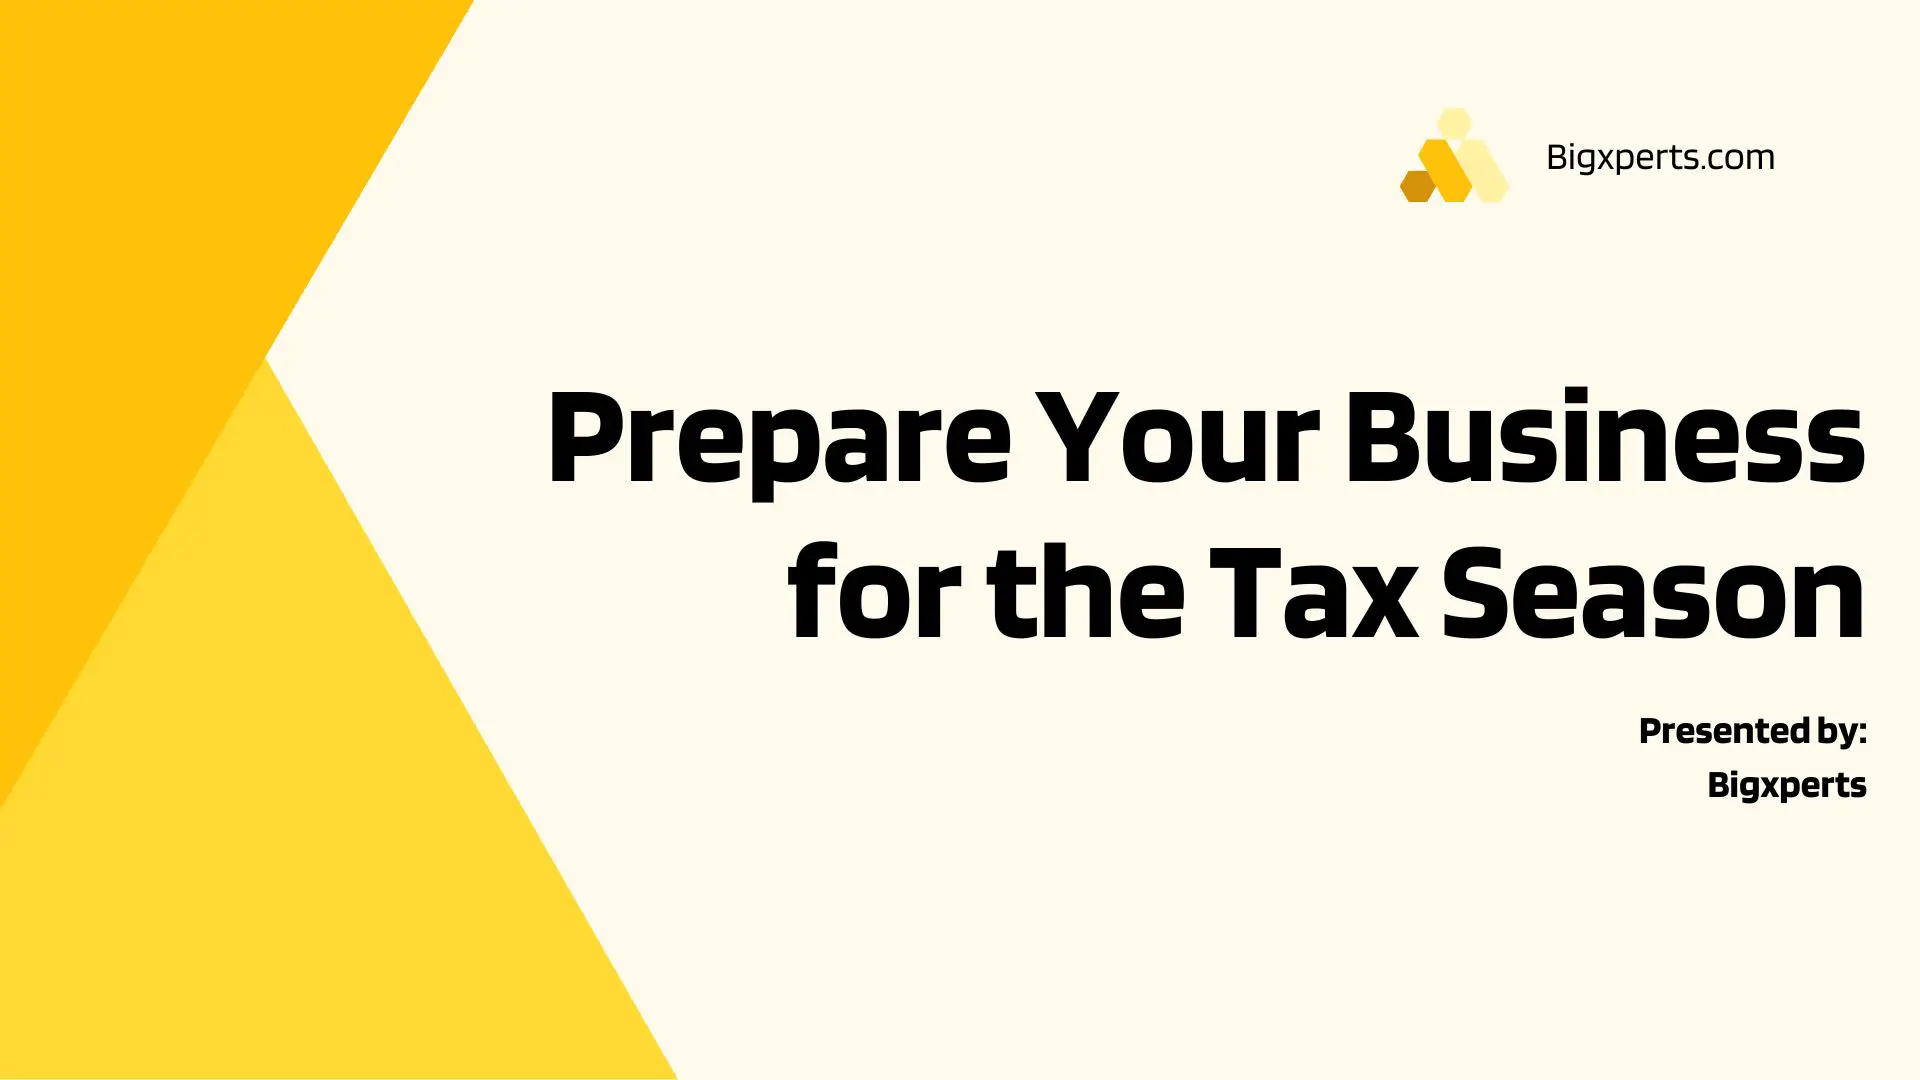 Prepare Your Business for the Tax Season